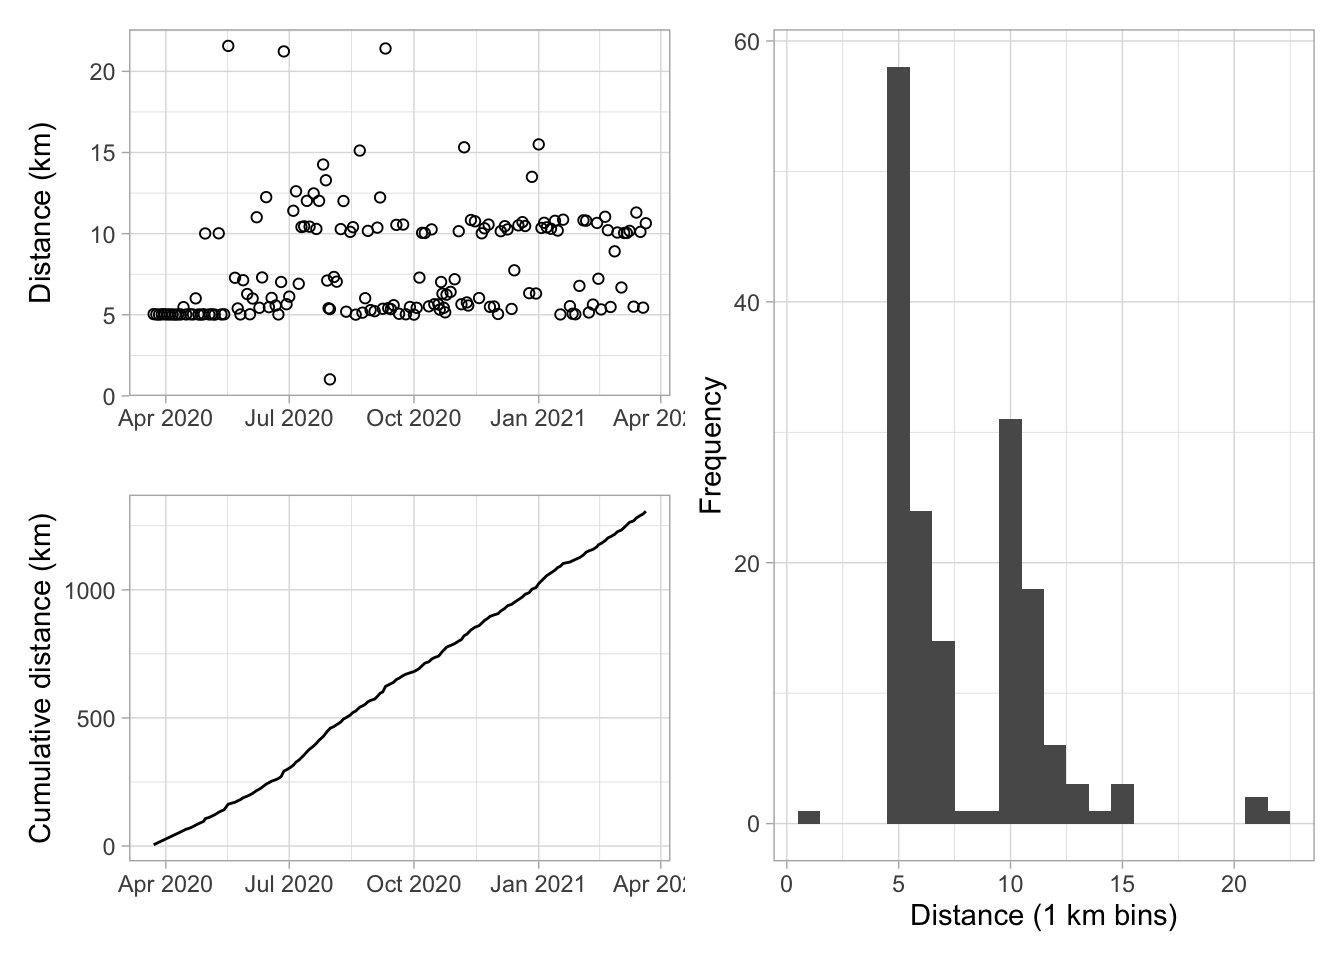 Three plots: distance over time scatterplot, cumulative distance over time line chart, and a histogram of run distance. Patterns show high frequency of 5 and 10 km runs and consistency of run days over time.